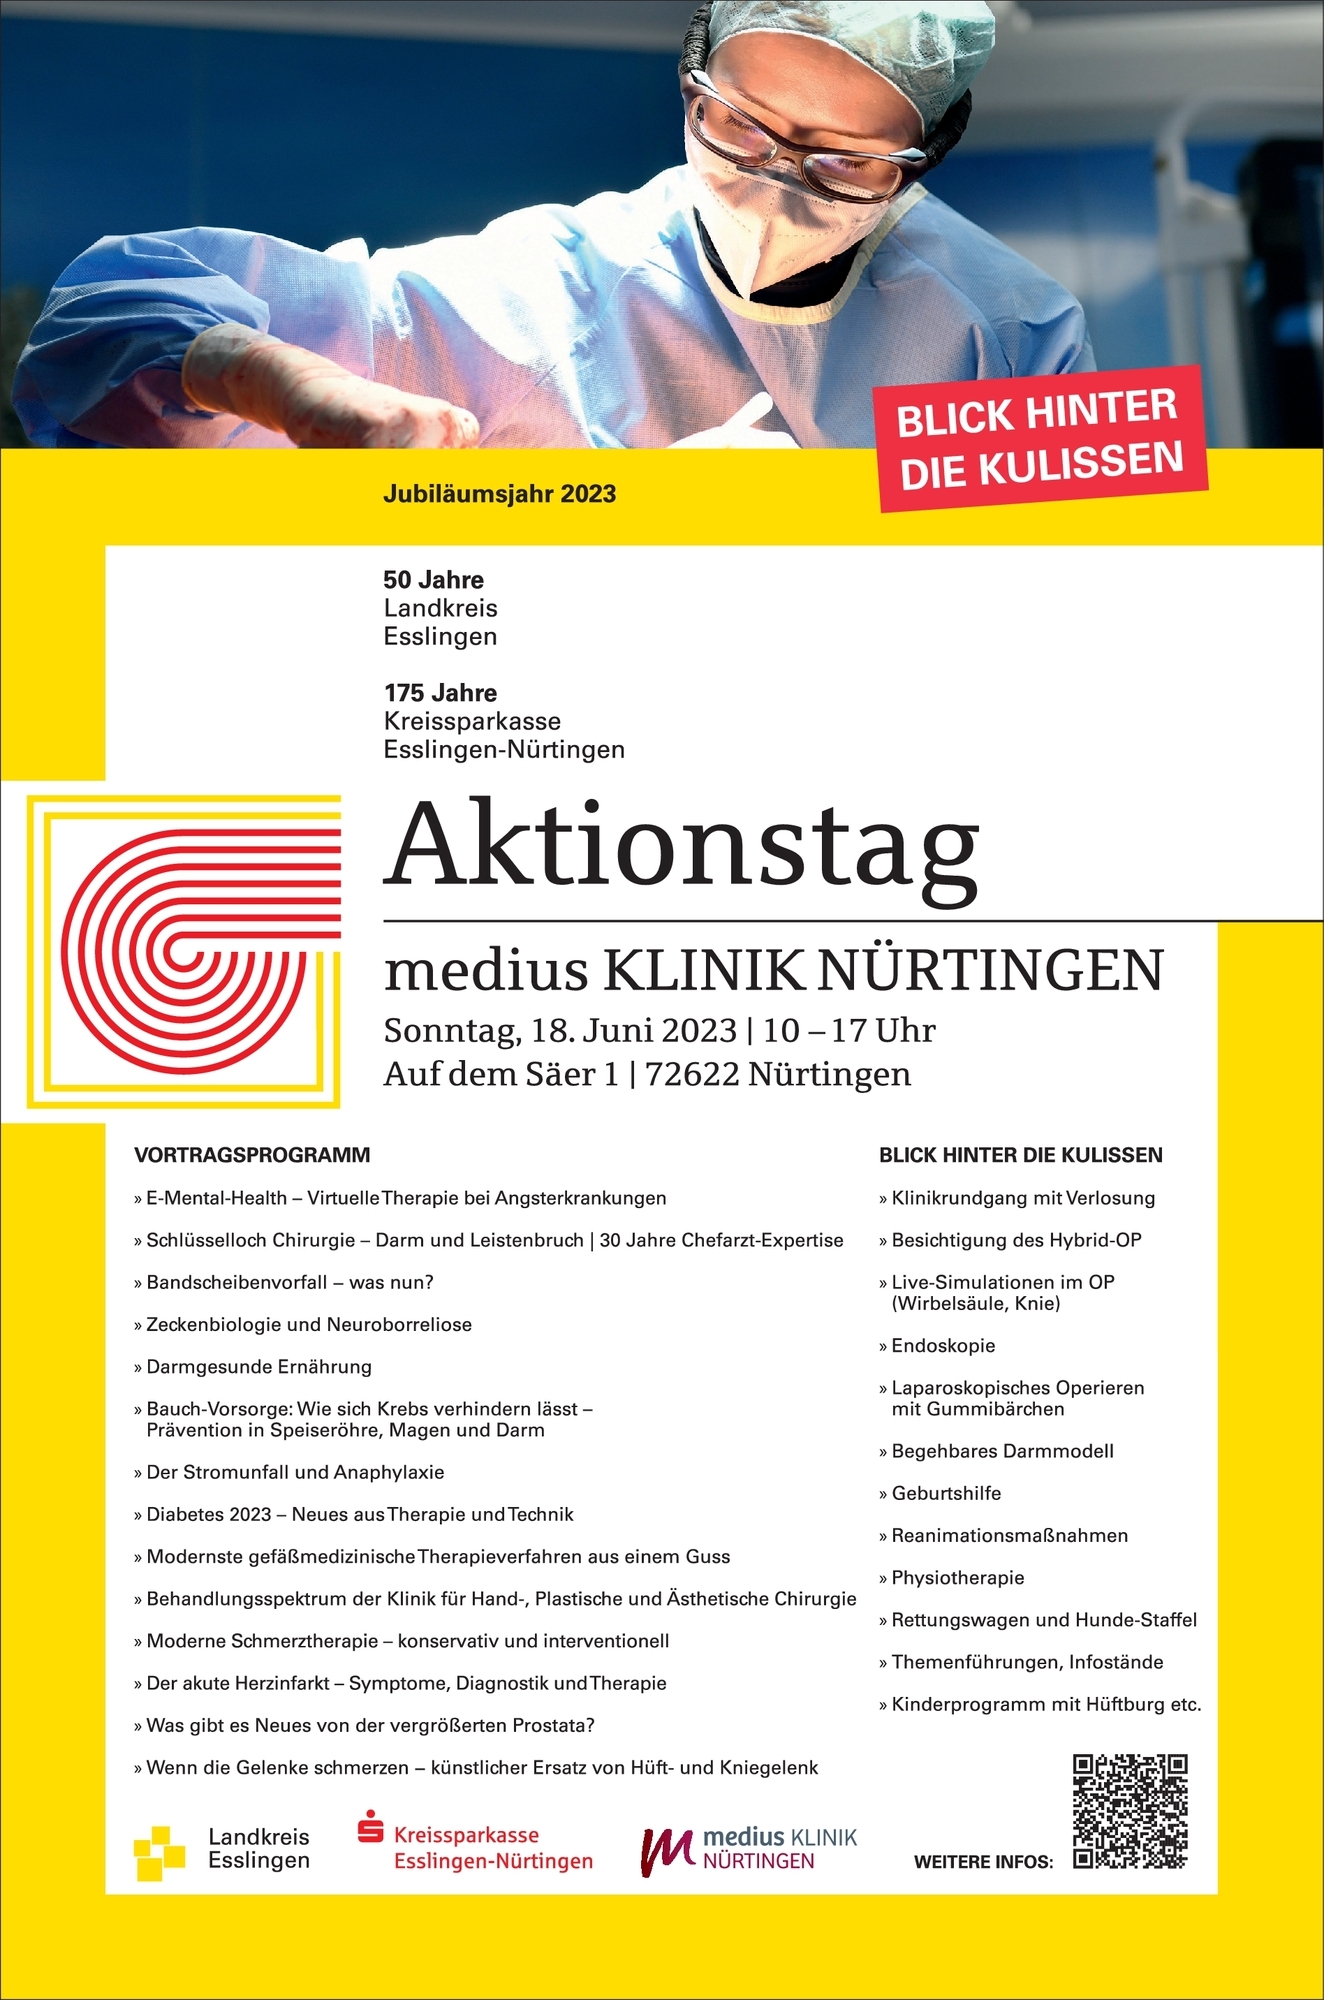 2002 01 673/00  23.06.18 Aktionstag mKN